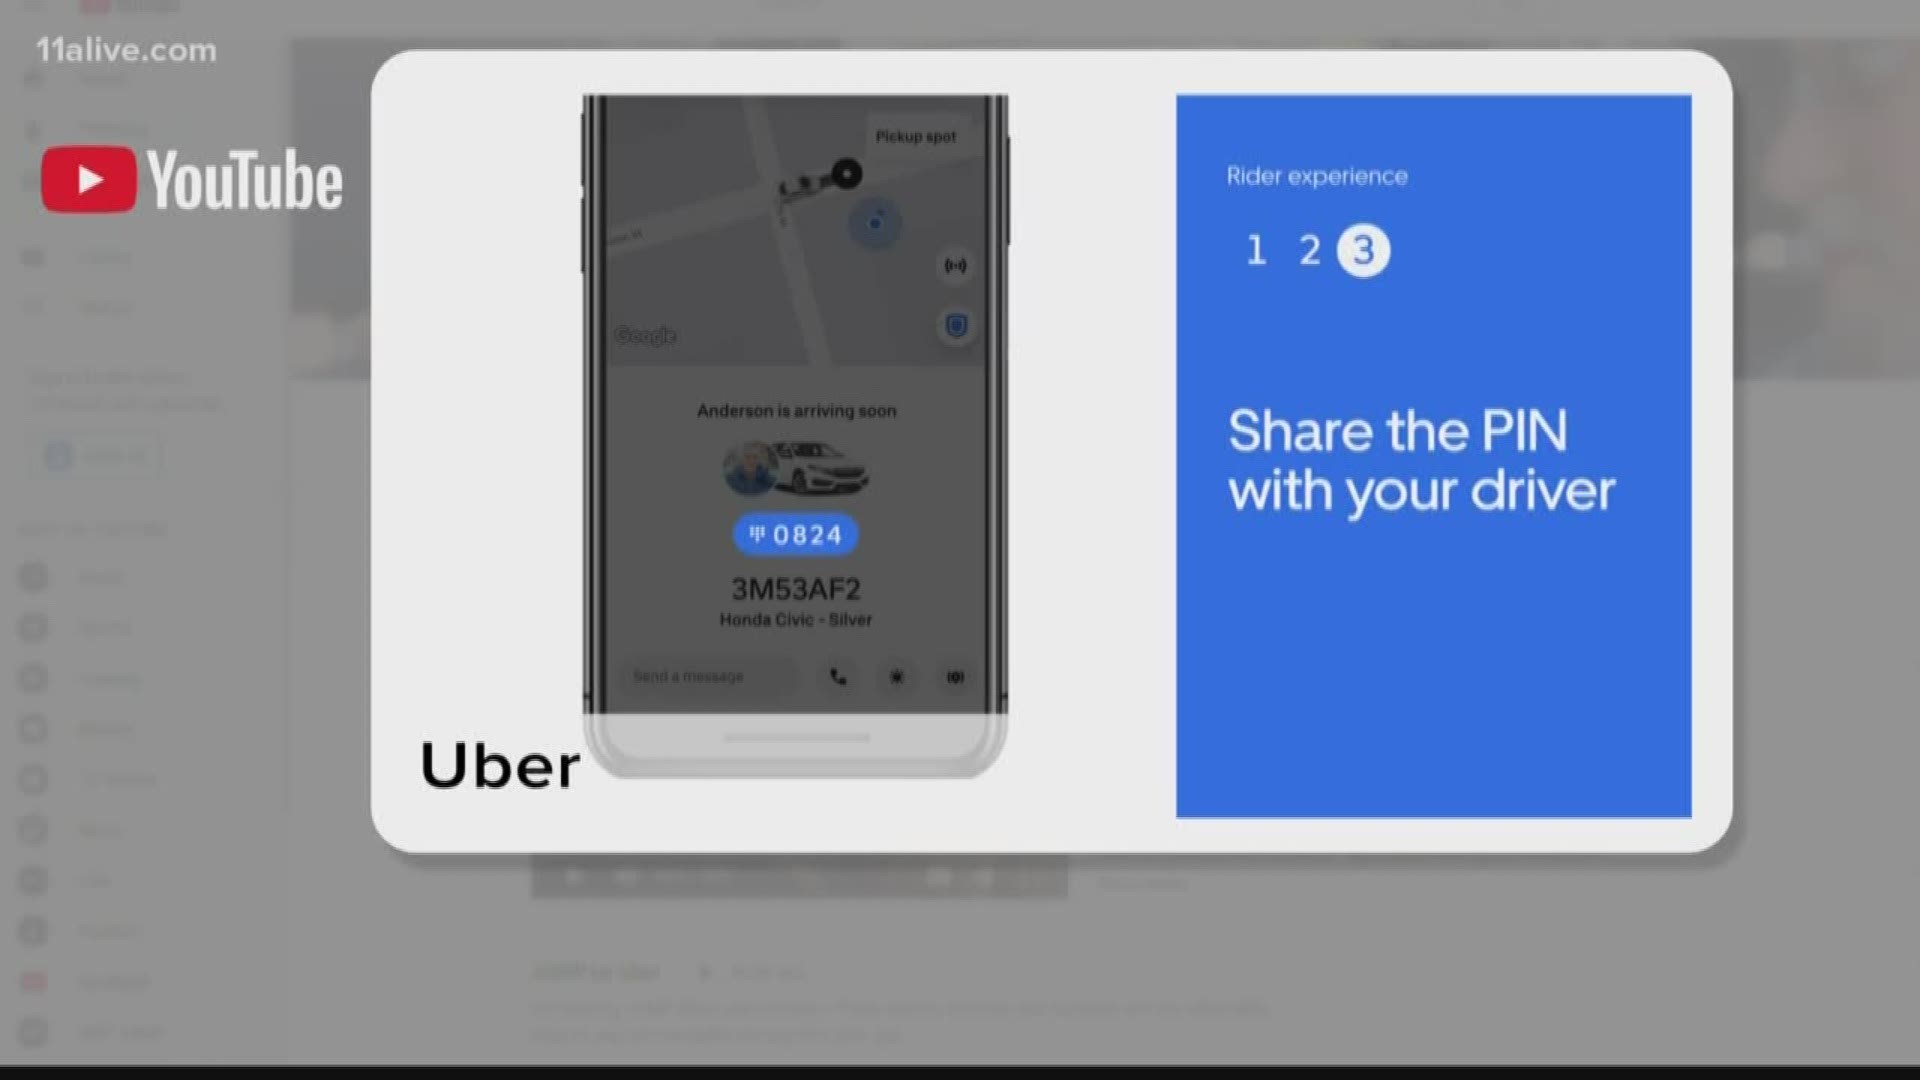 When the feature is enabled, a trip cannot start until the correct PIN is entered into the driver’s app.